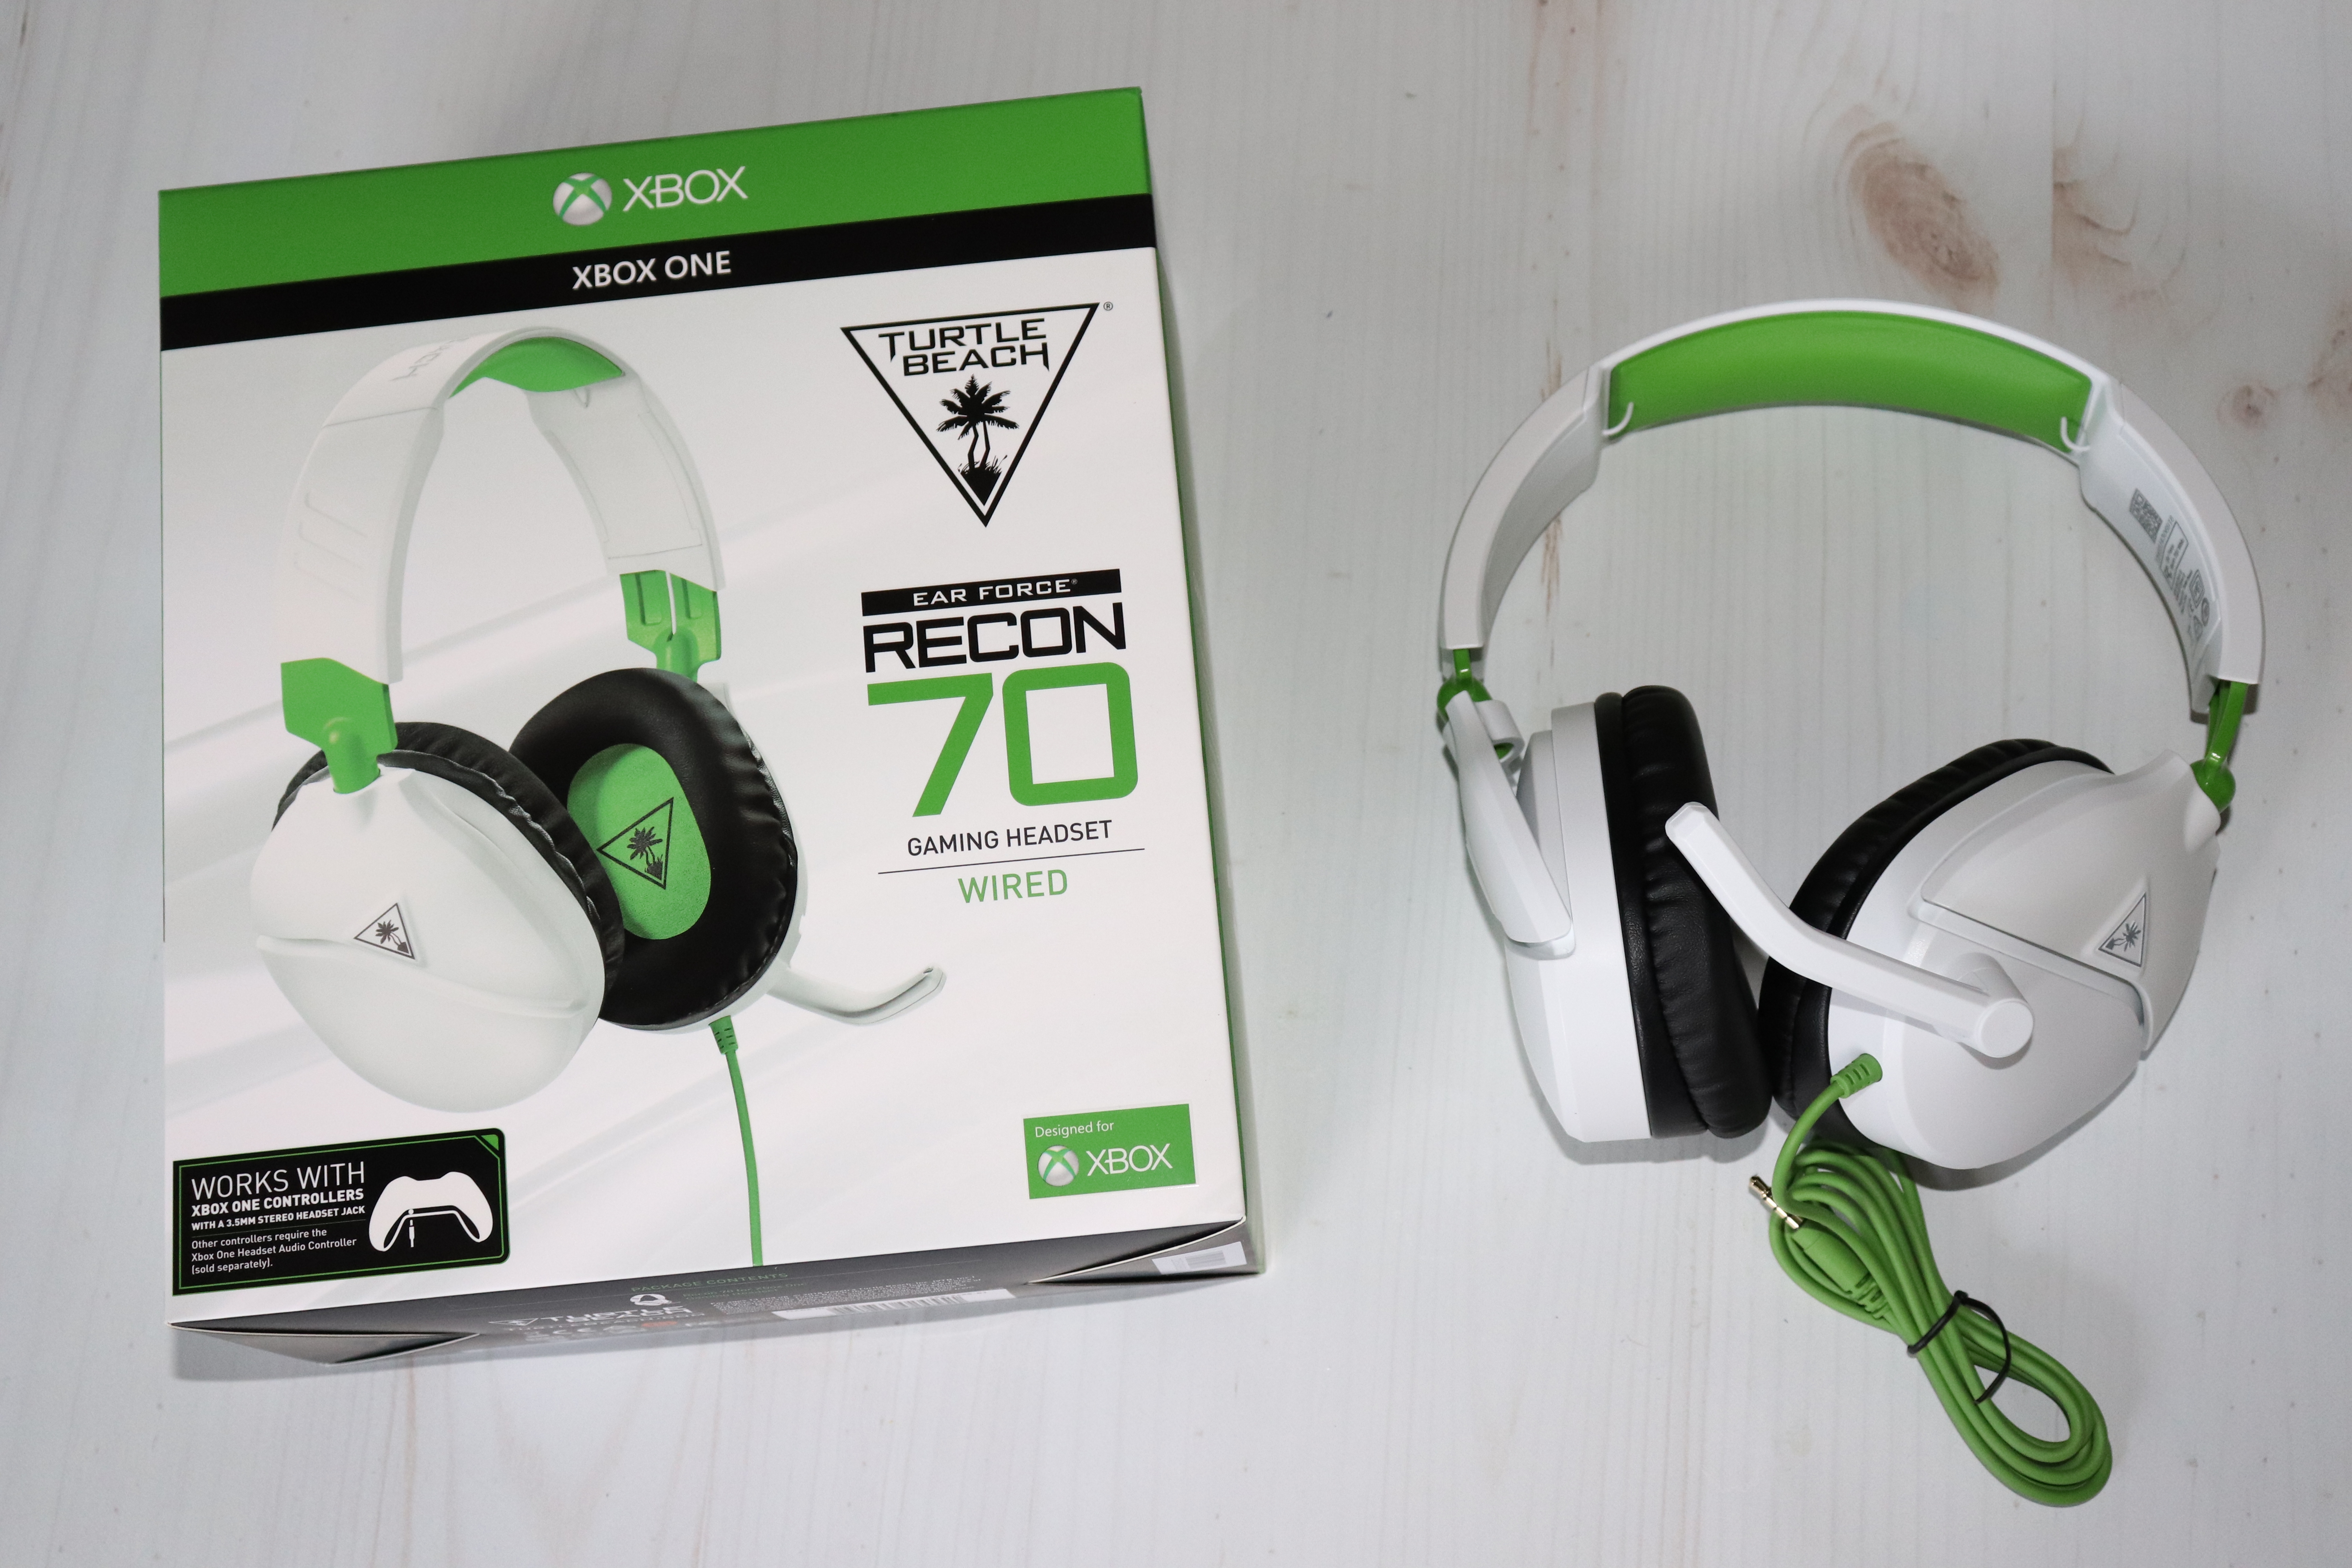 Calling all Gamers! This Turtle Beach Recon 70 Gaming Headset is Amazing!